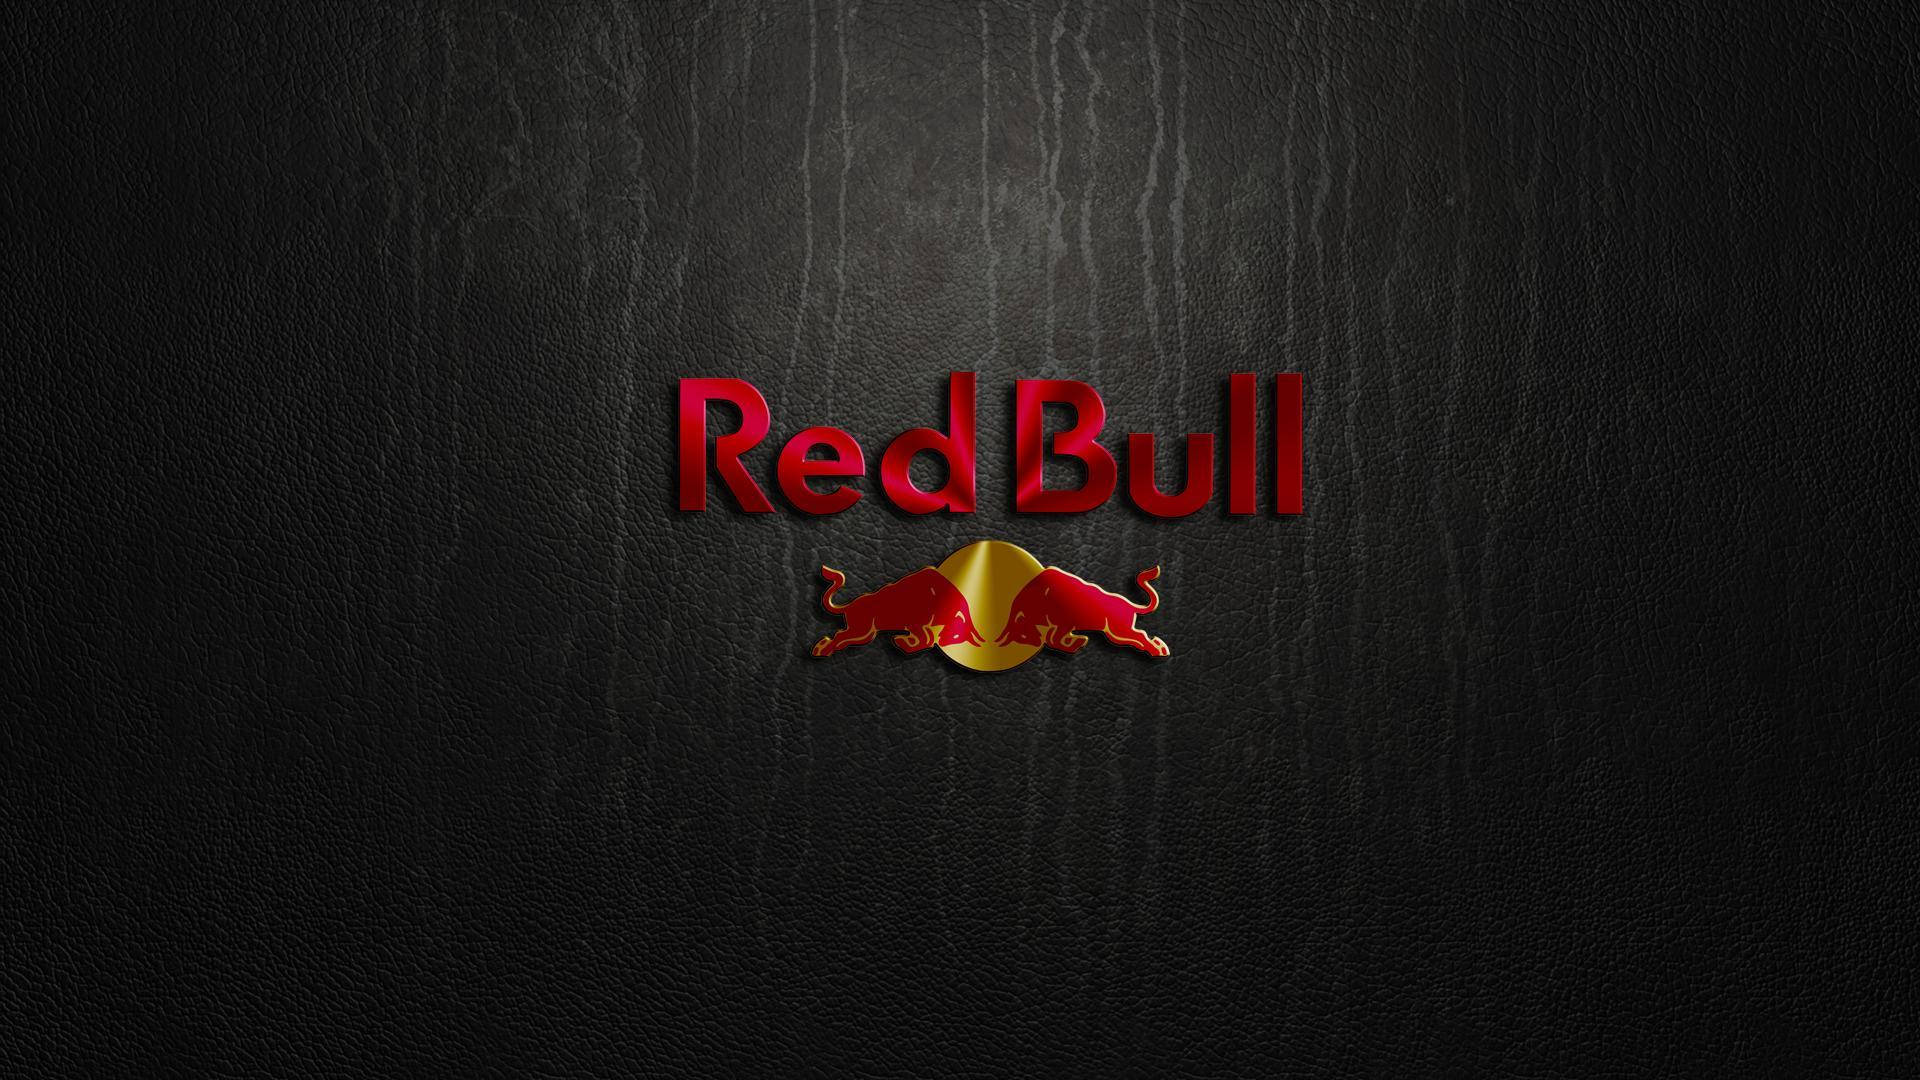 Cool Logos Red Bull Background